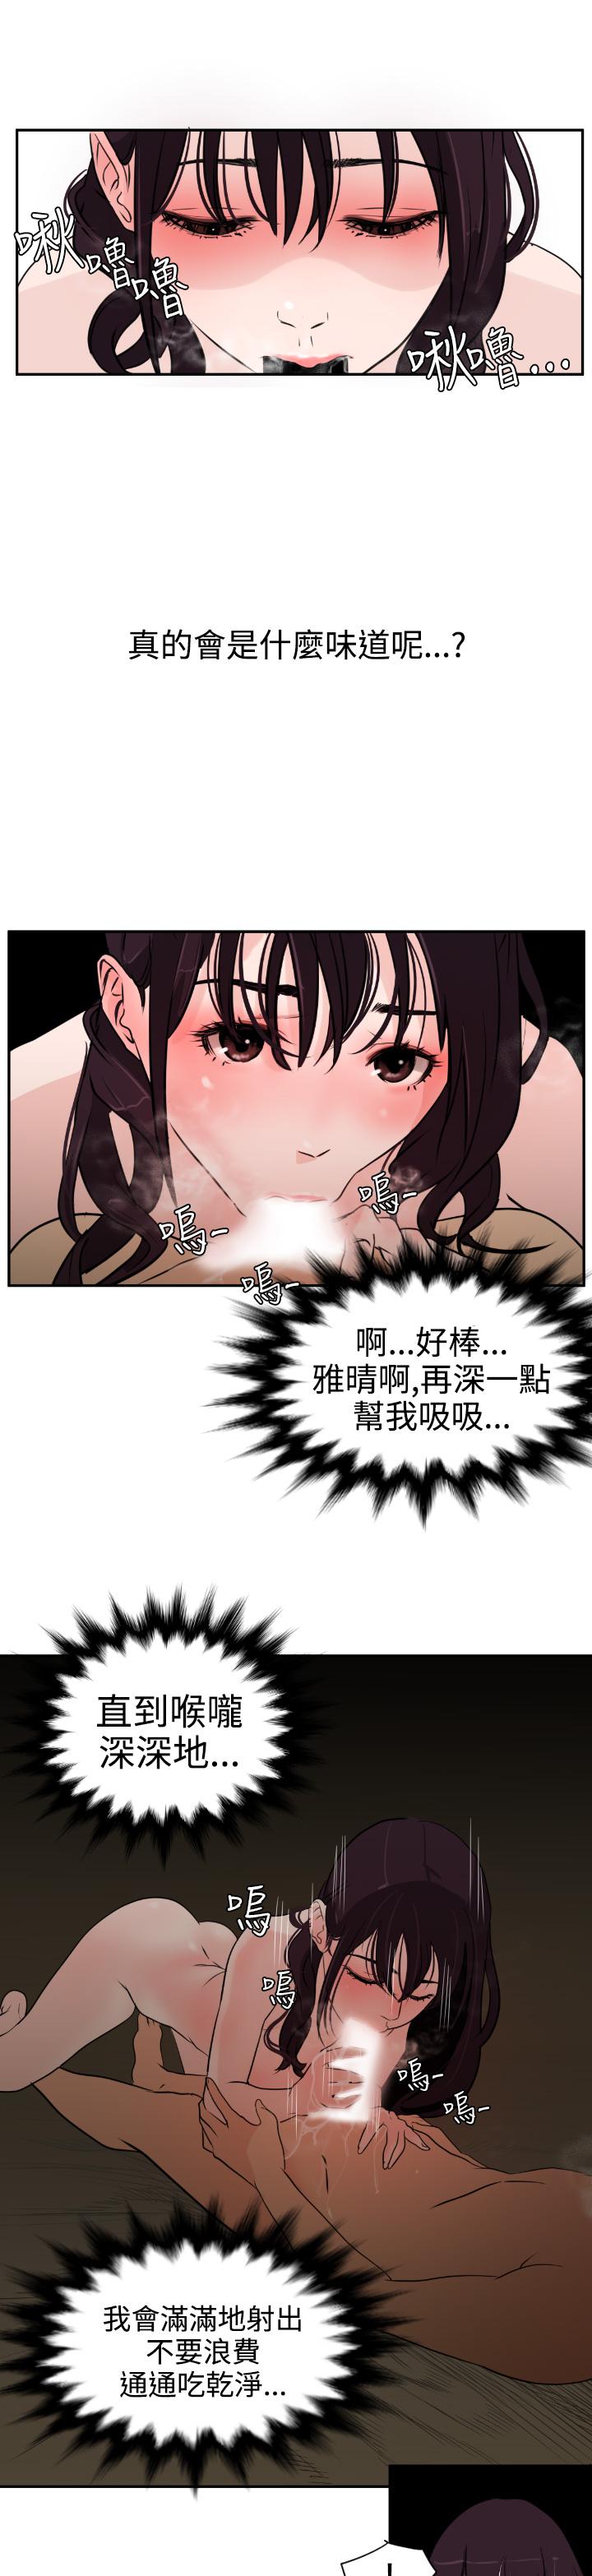 Desire King (慾求王) Ch.1-12 (chinese) 198